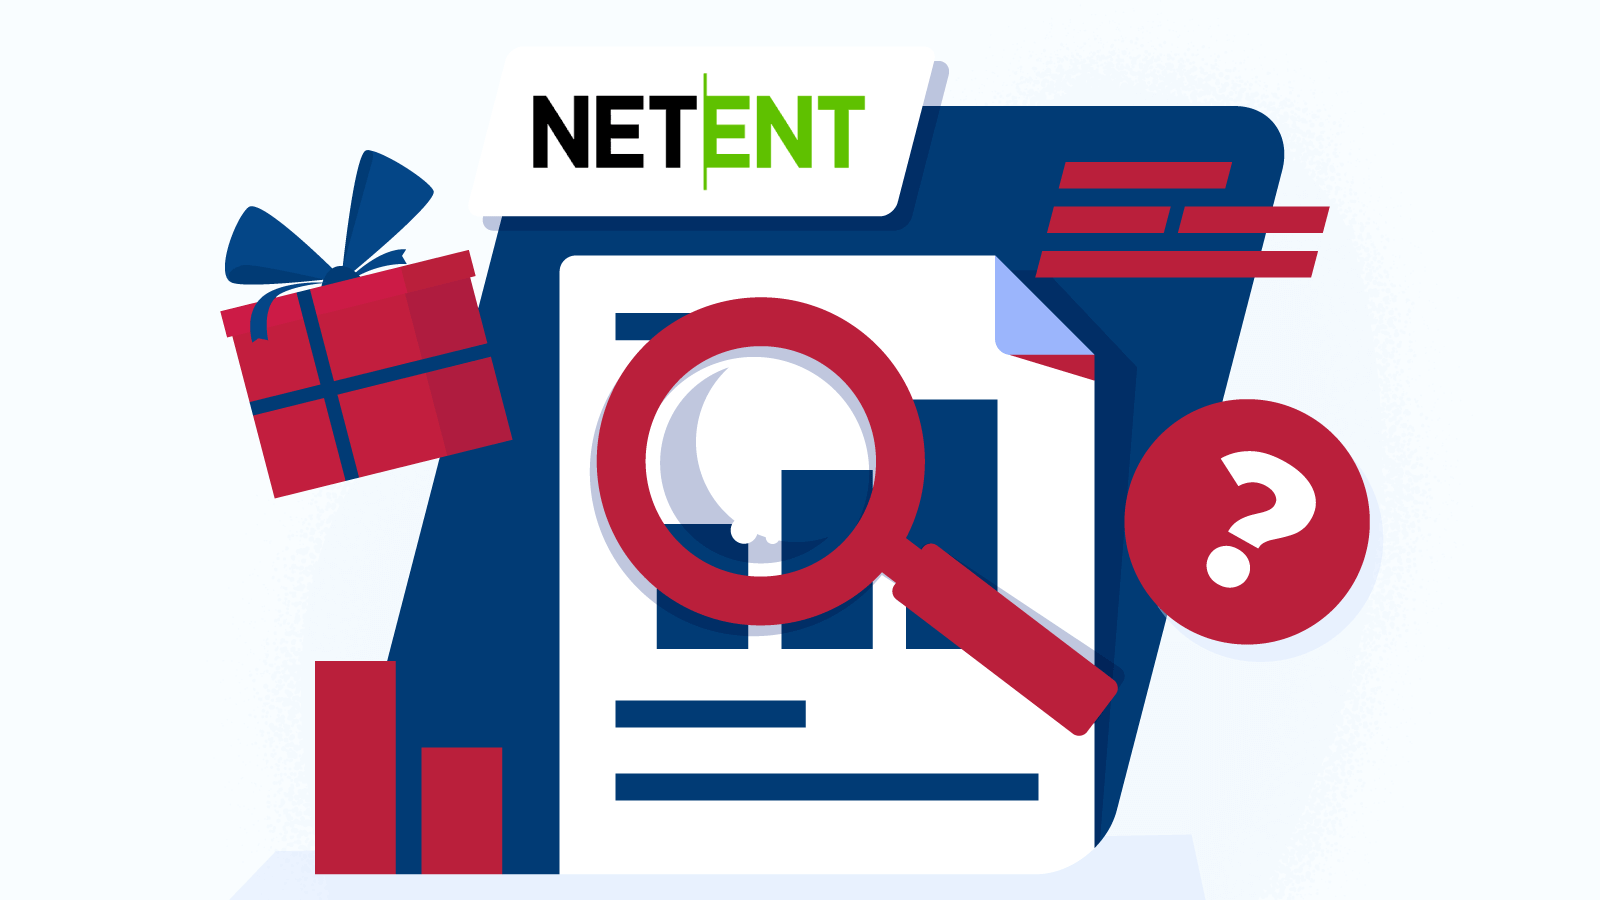 How we research NetEnt bonus no deposit and free spins offers